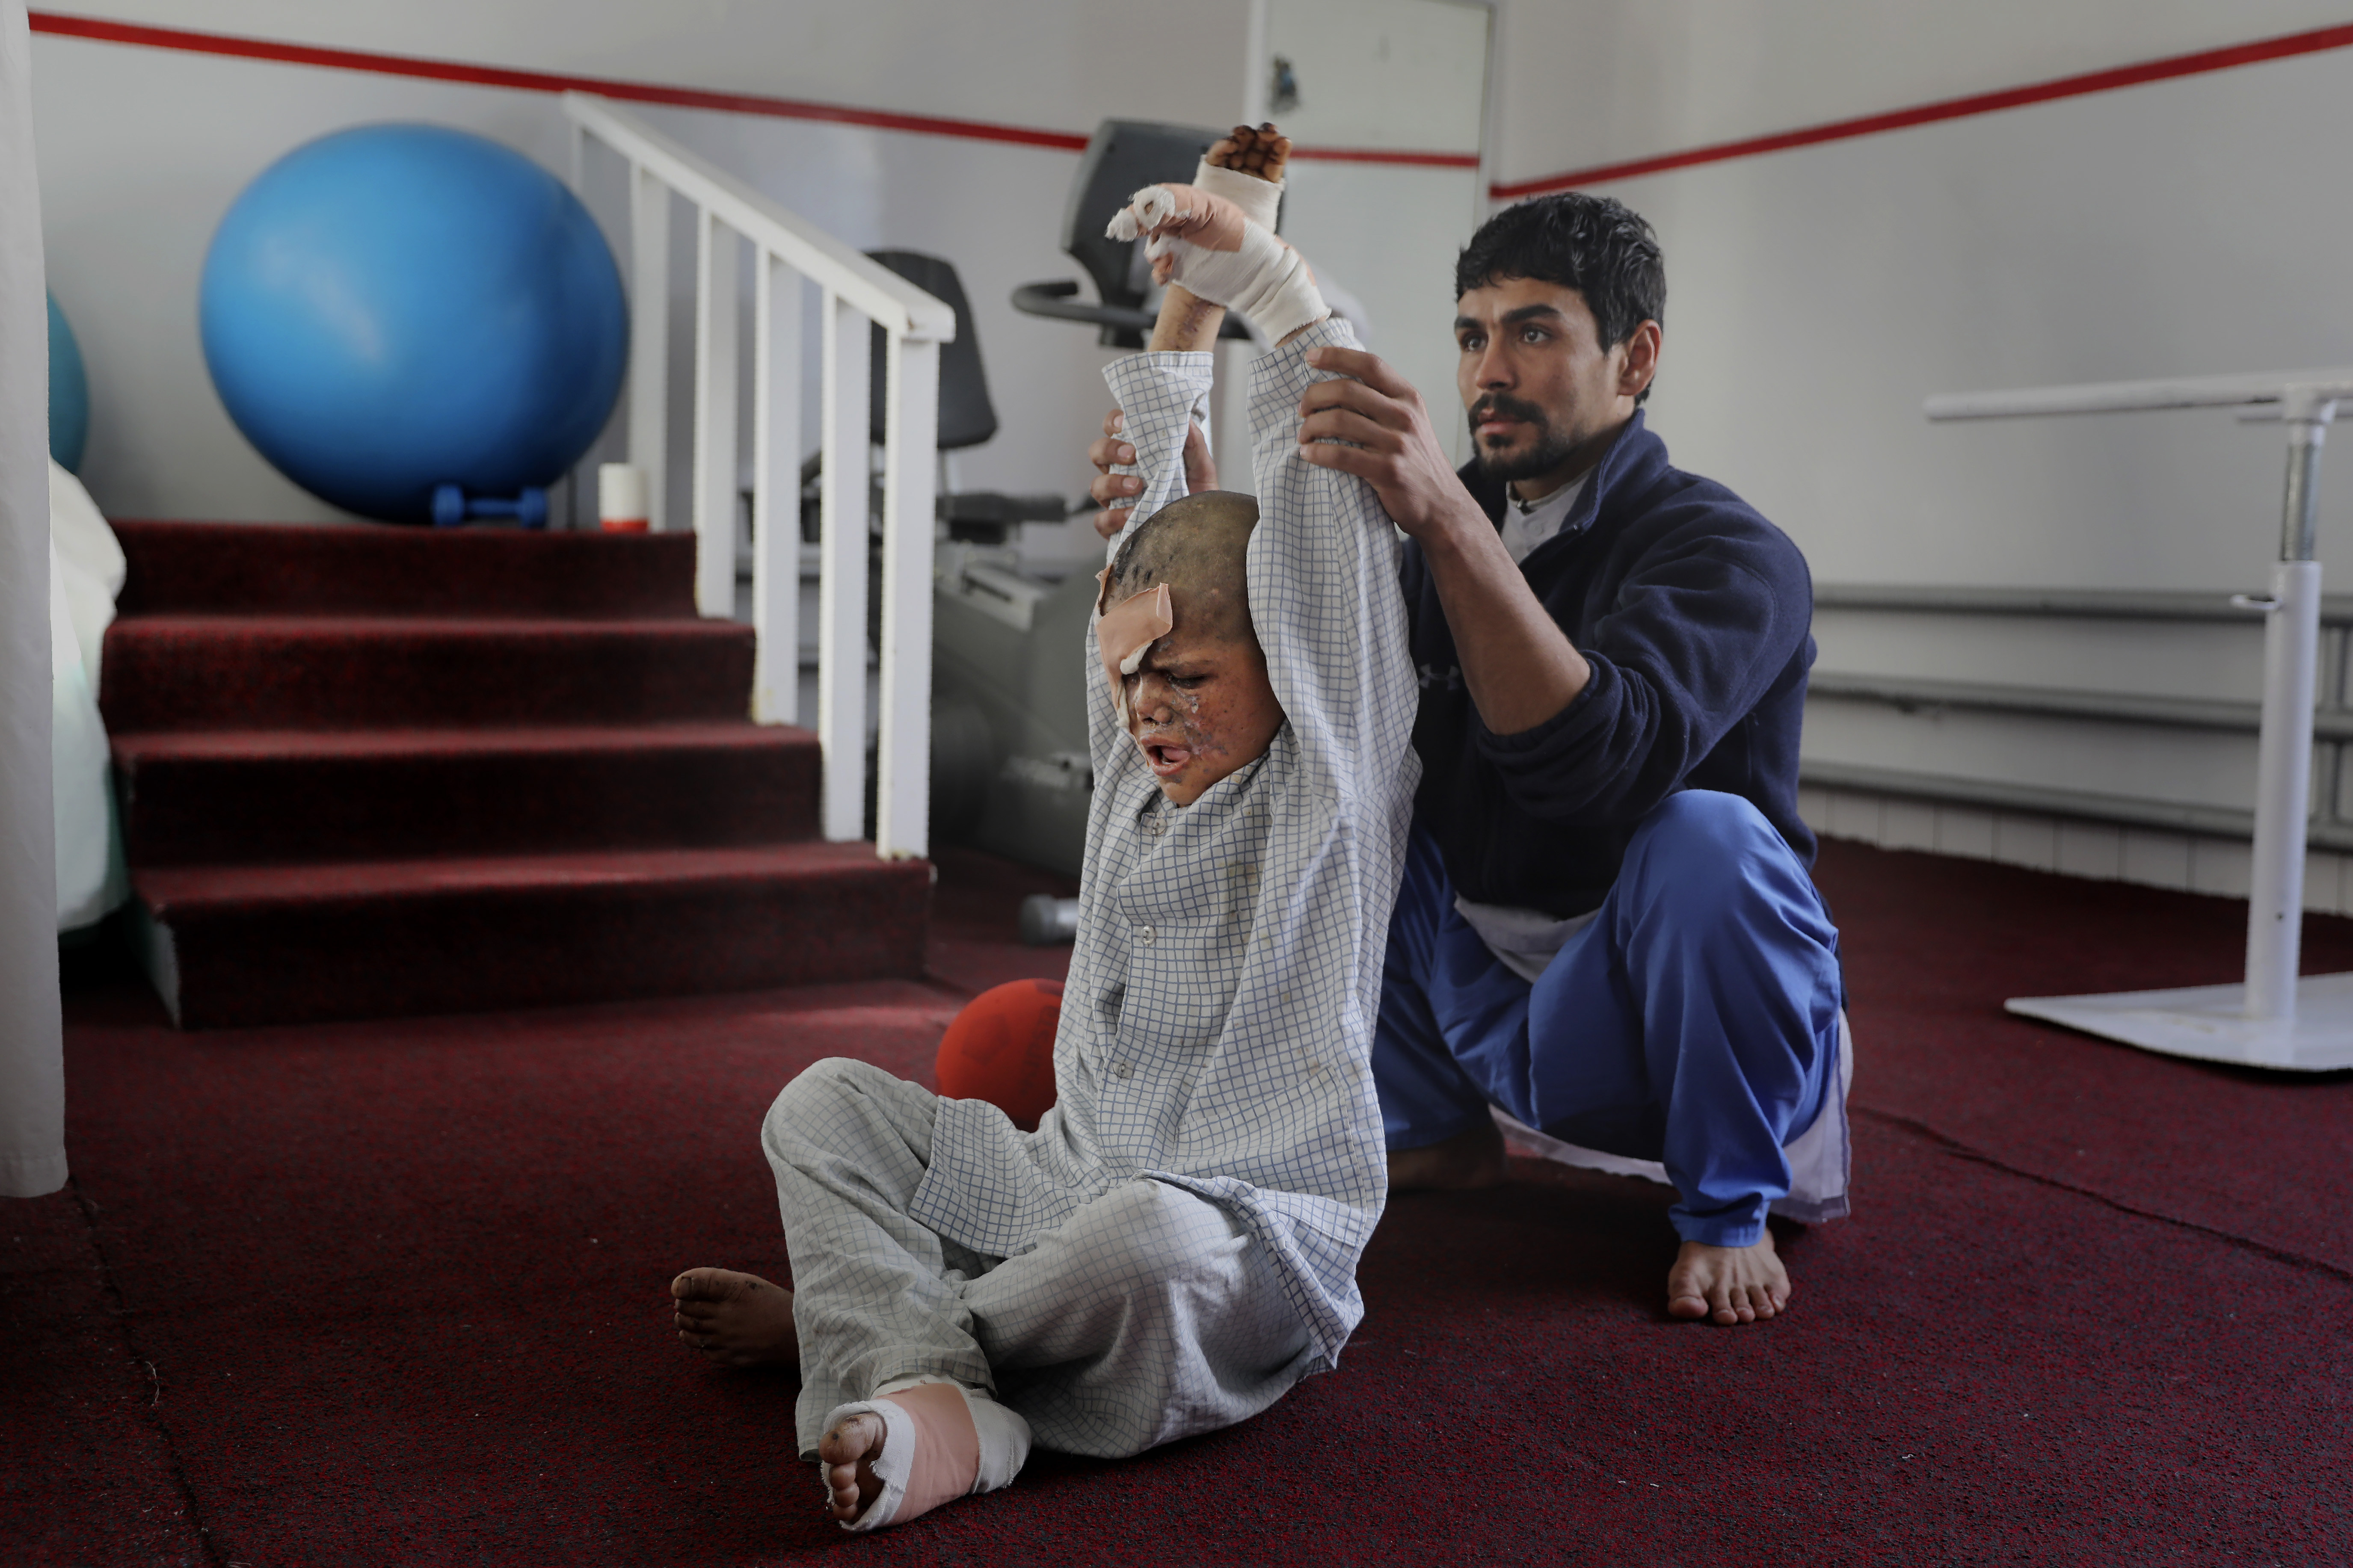 In this Thursday, Dec. 5, 2019, photo, an Afghan physiotherapist helps nine-year-old Eimal, who has lost his right eye and several fingers on his hands in a landmine blast, stretch at Emergency Surgical Center for Civilian War Victims in Kabul, Afghanistan. The total number of children killed or maimed in more than four decades long Afghan war is not known. But, with a population where close to 50% are under the age of 20, the losses among the young is tremendous. (AP Photo/Altaf Qadri)